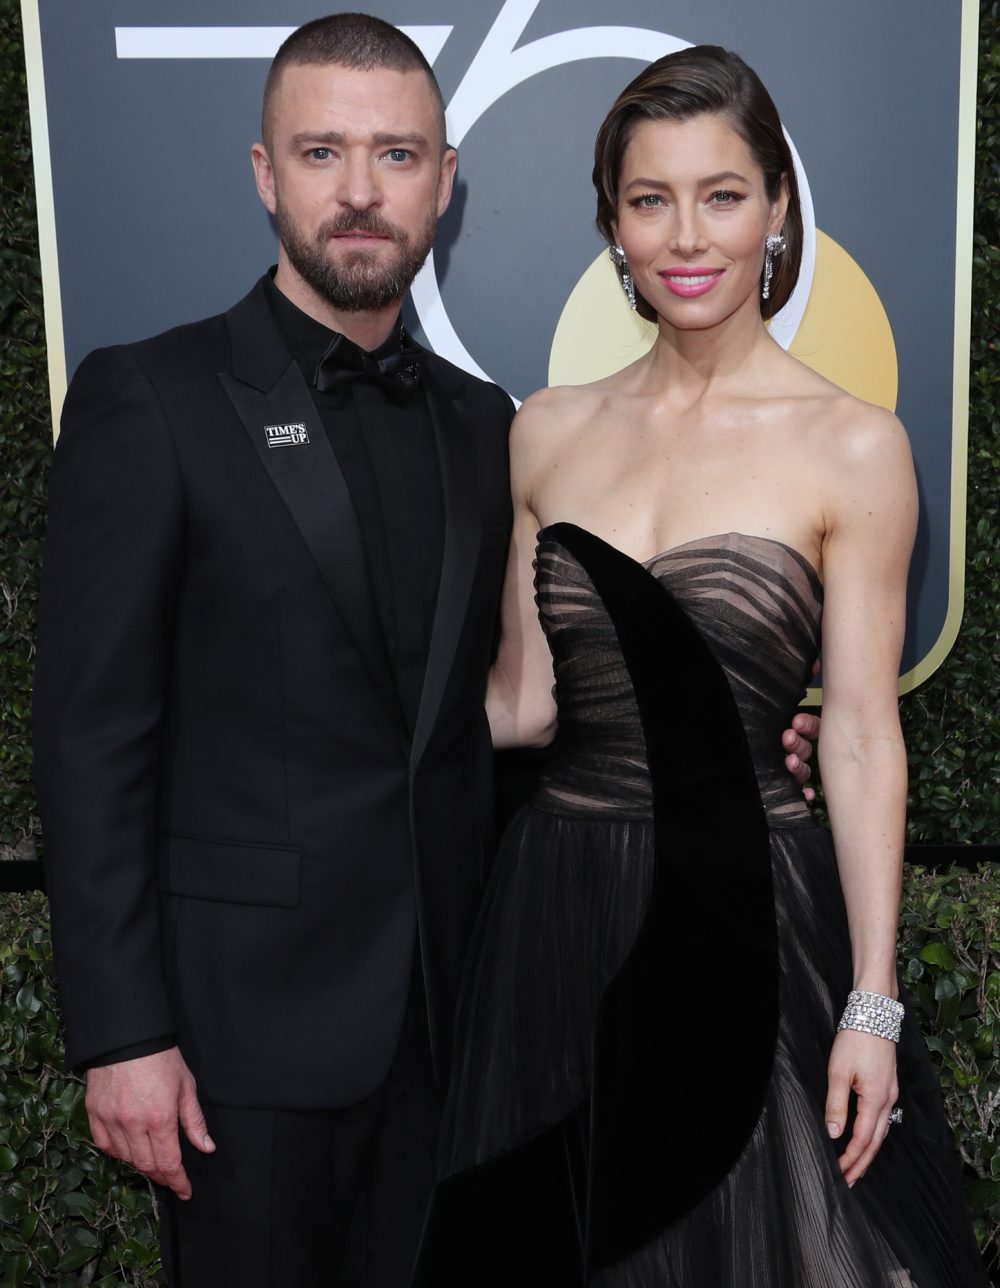 Justin Timberlake and Jessica Biel Step Out Arm in Arm After PDA Drama